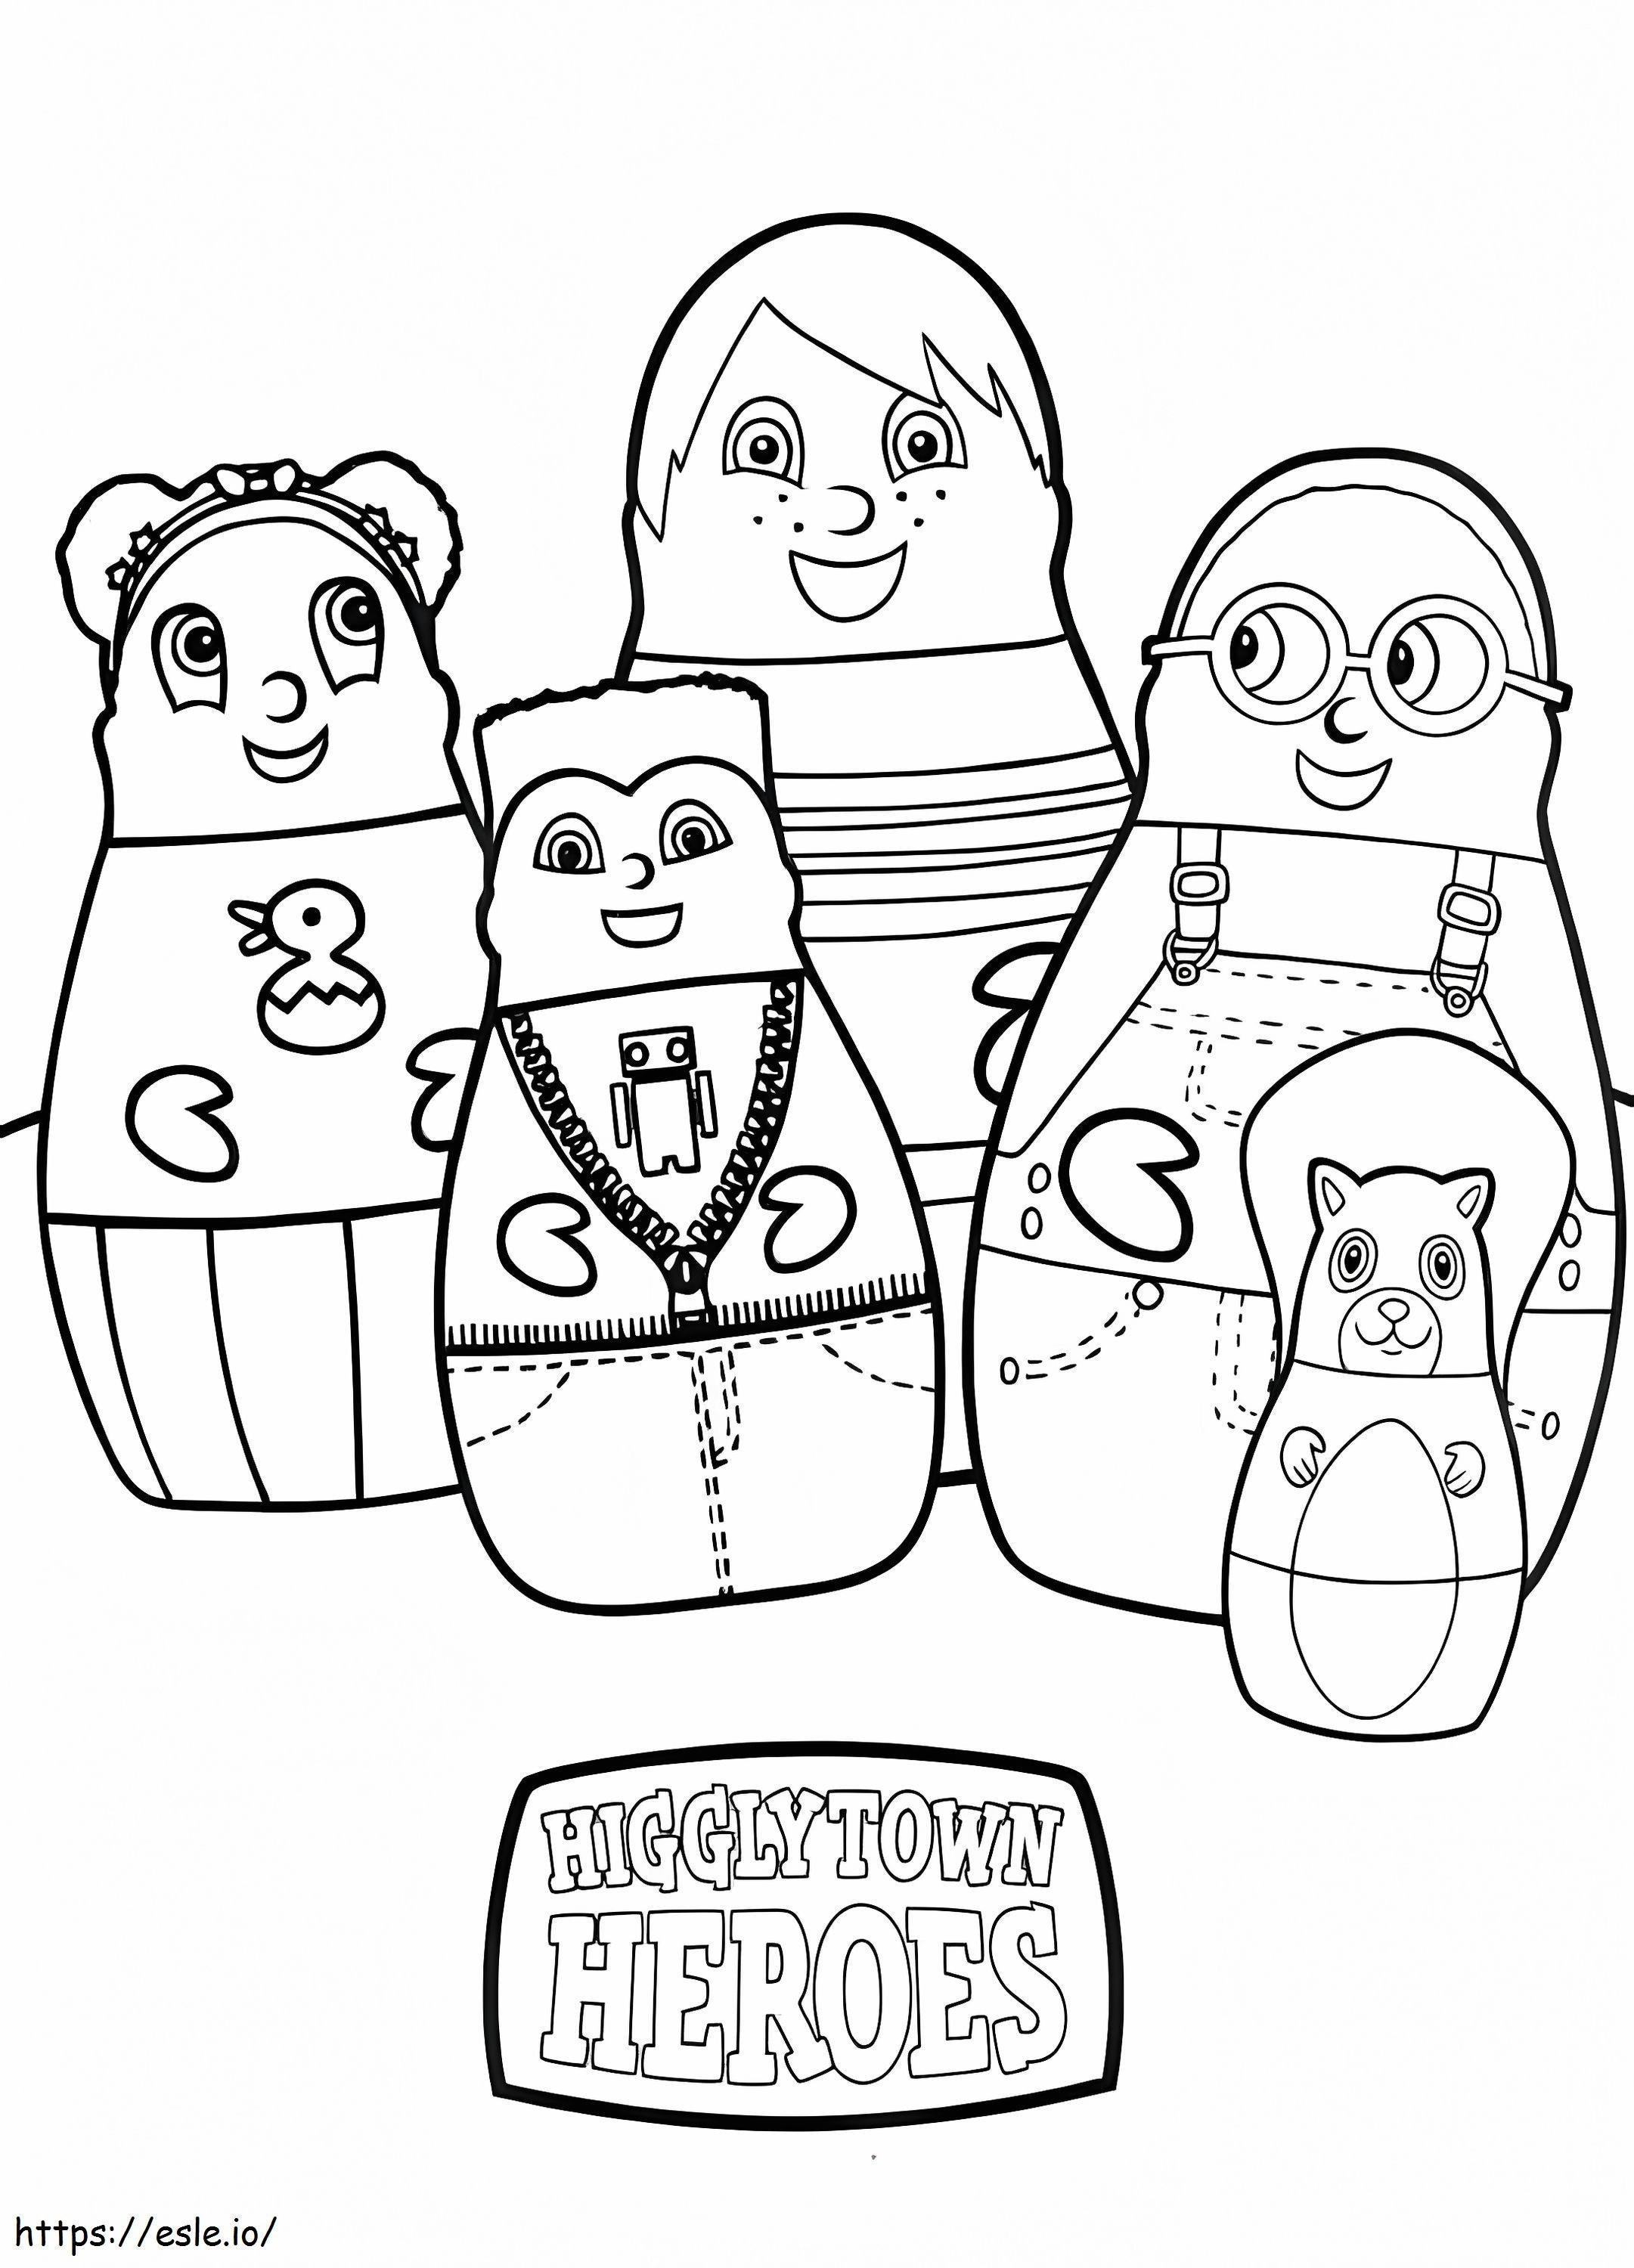 Higglytown Heroes Characters coloring page